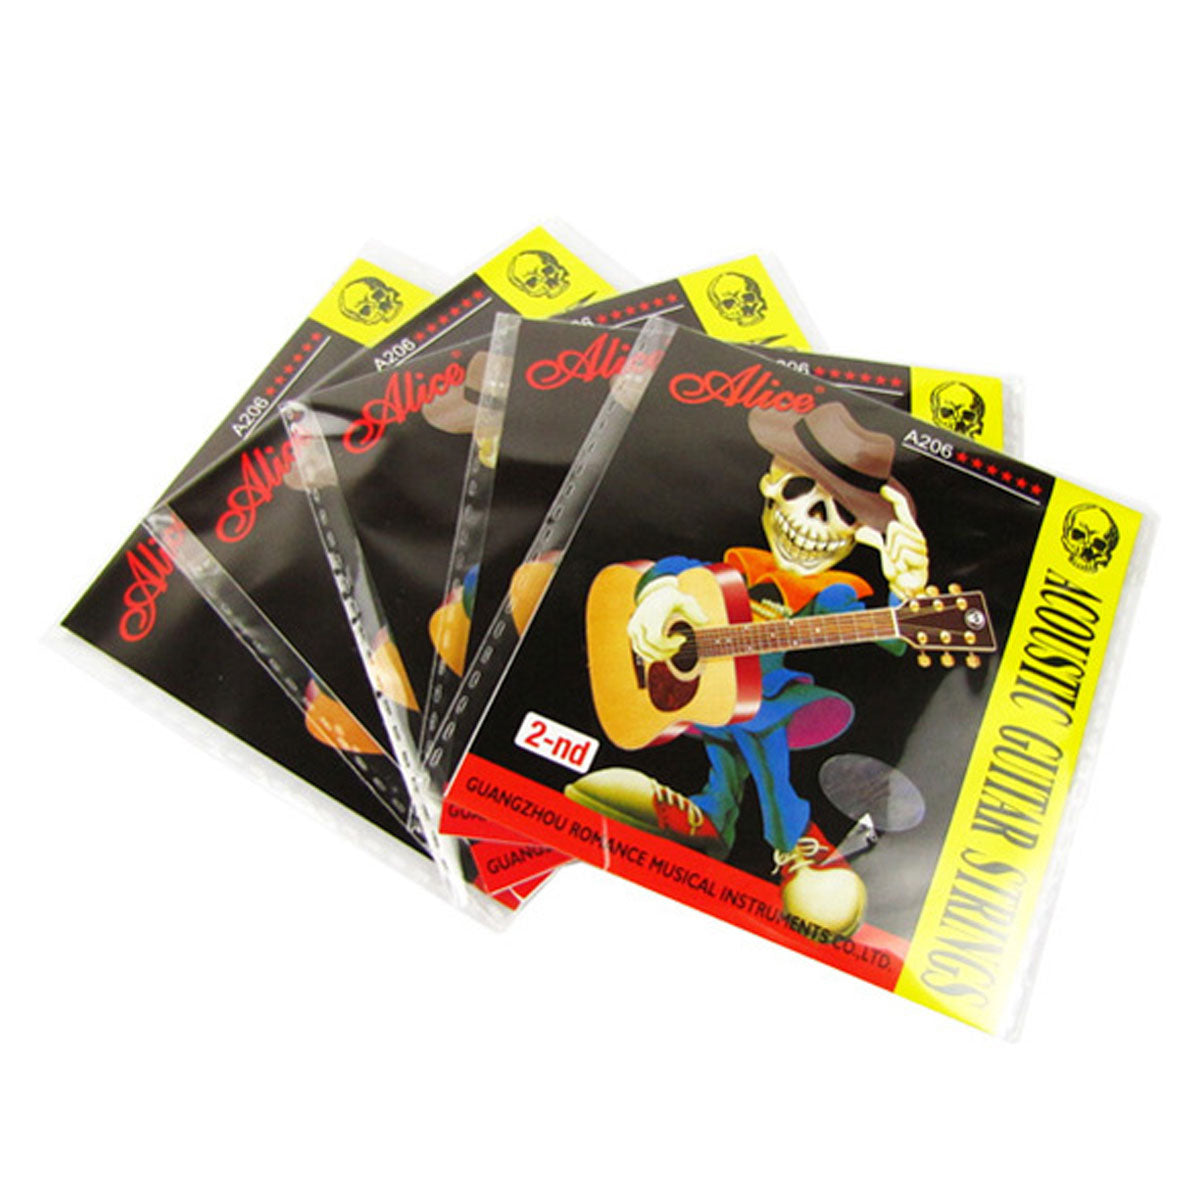 Musiclily Alice Stainless Steel Acoustic Guitar B-2nd Strings( 5 Pieces)